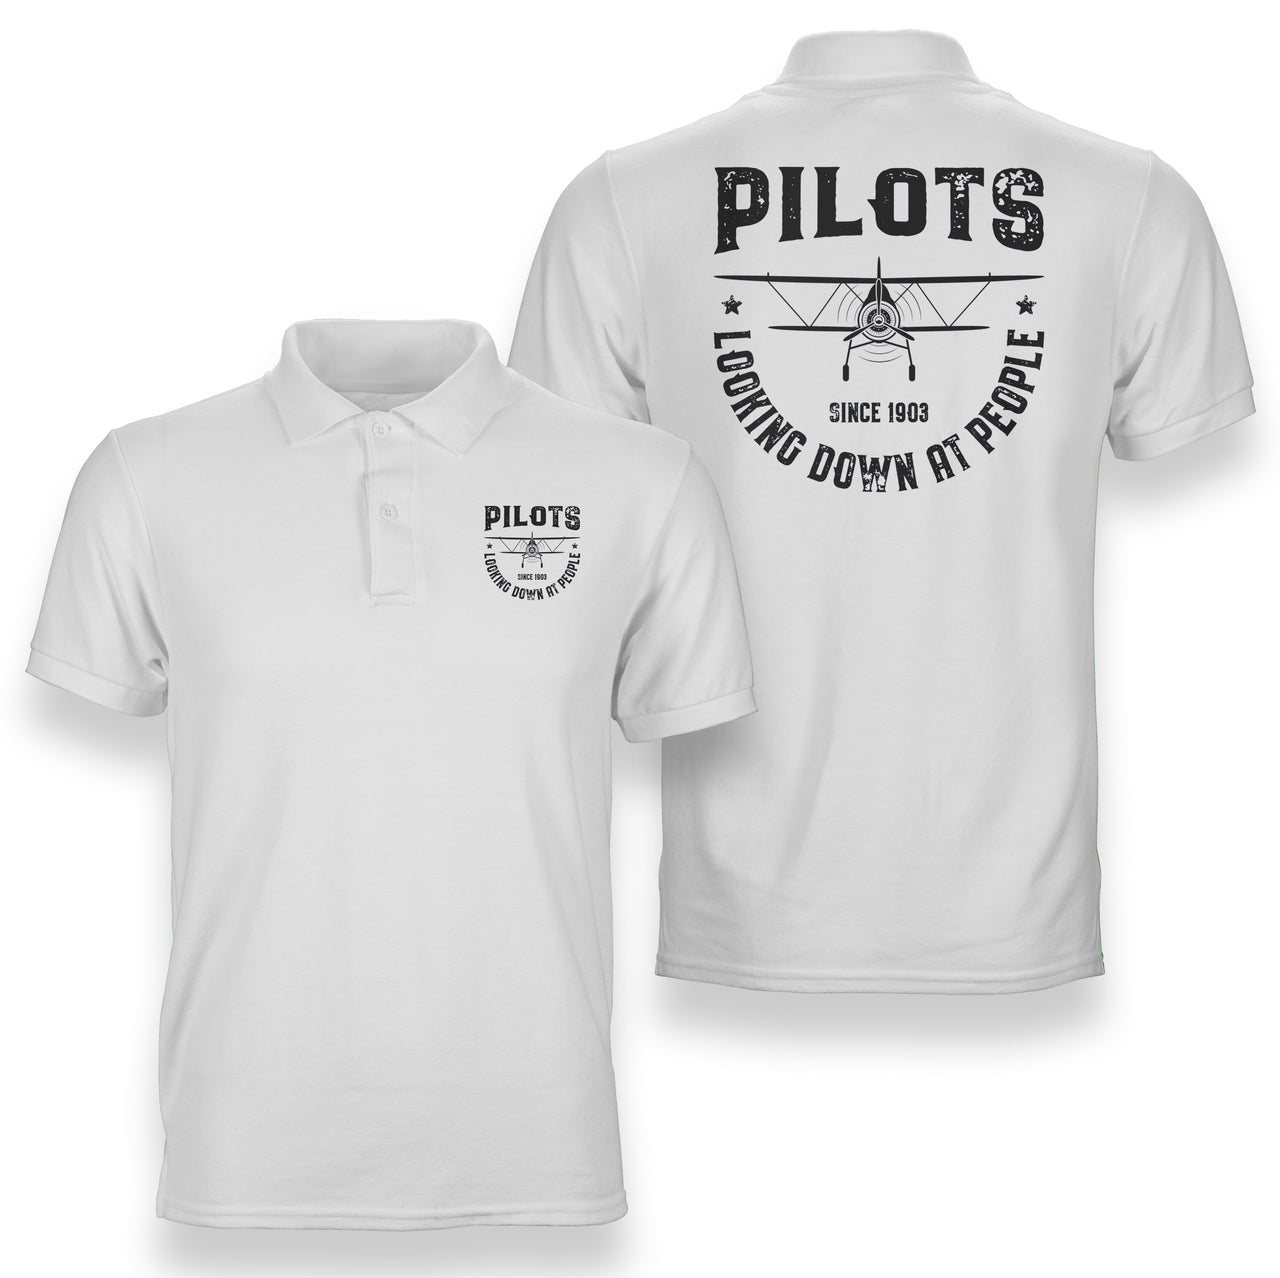 Pilots Looking Down at People Since 1903 Designed Double Side Polo T-Shirts